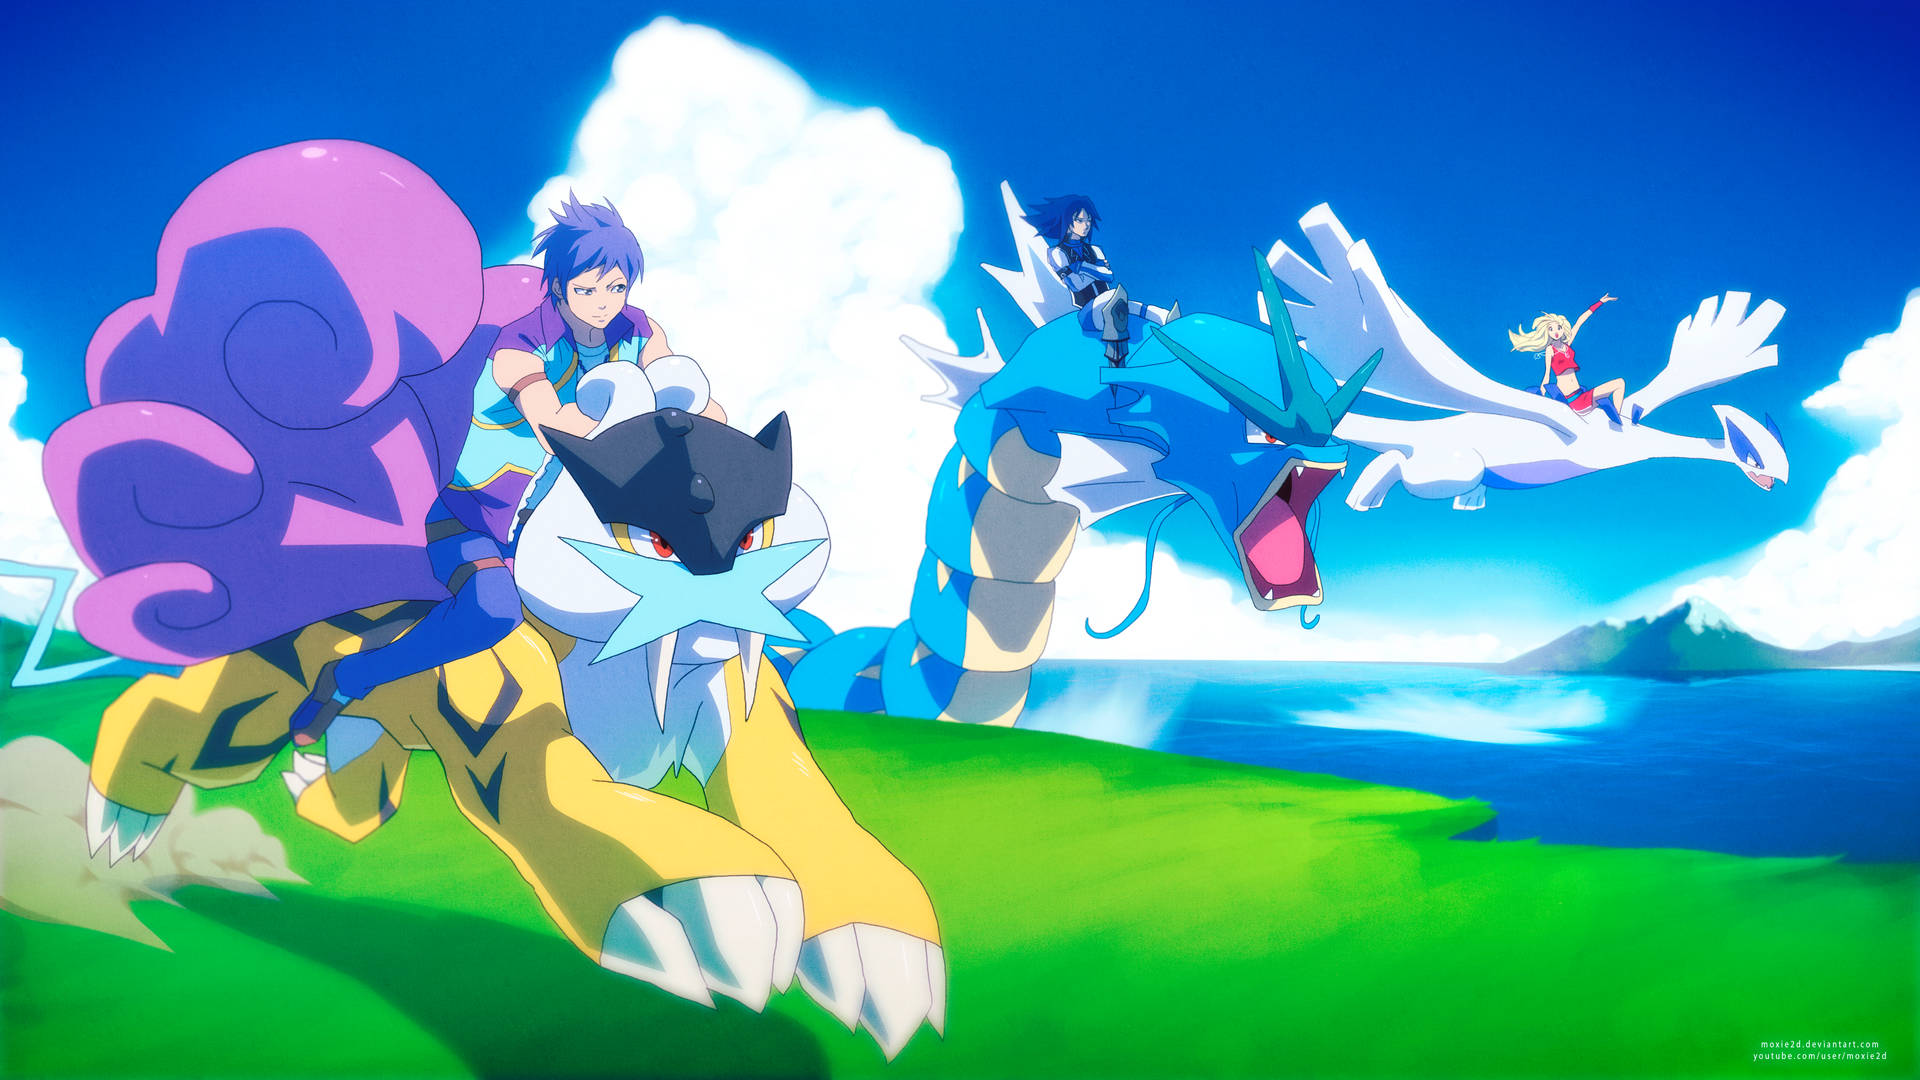 Lugia's Powerful Pokemon Team Joining Forces For The Greatest Battle Background